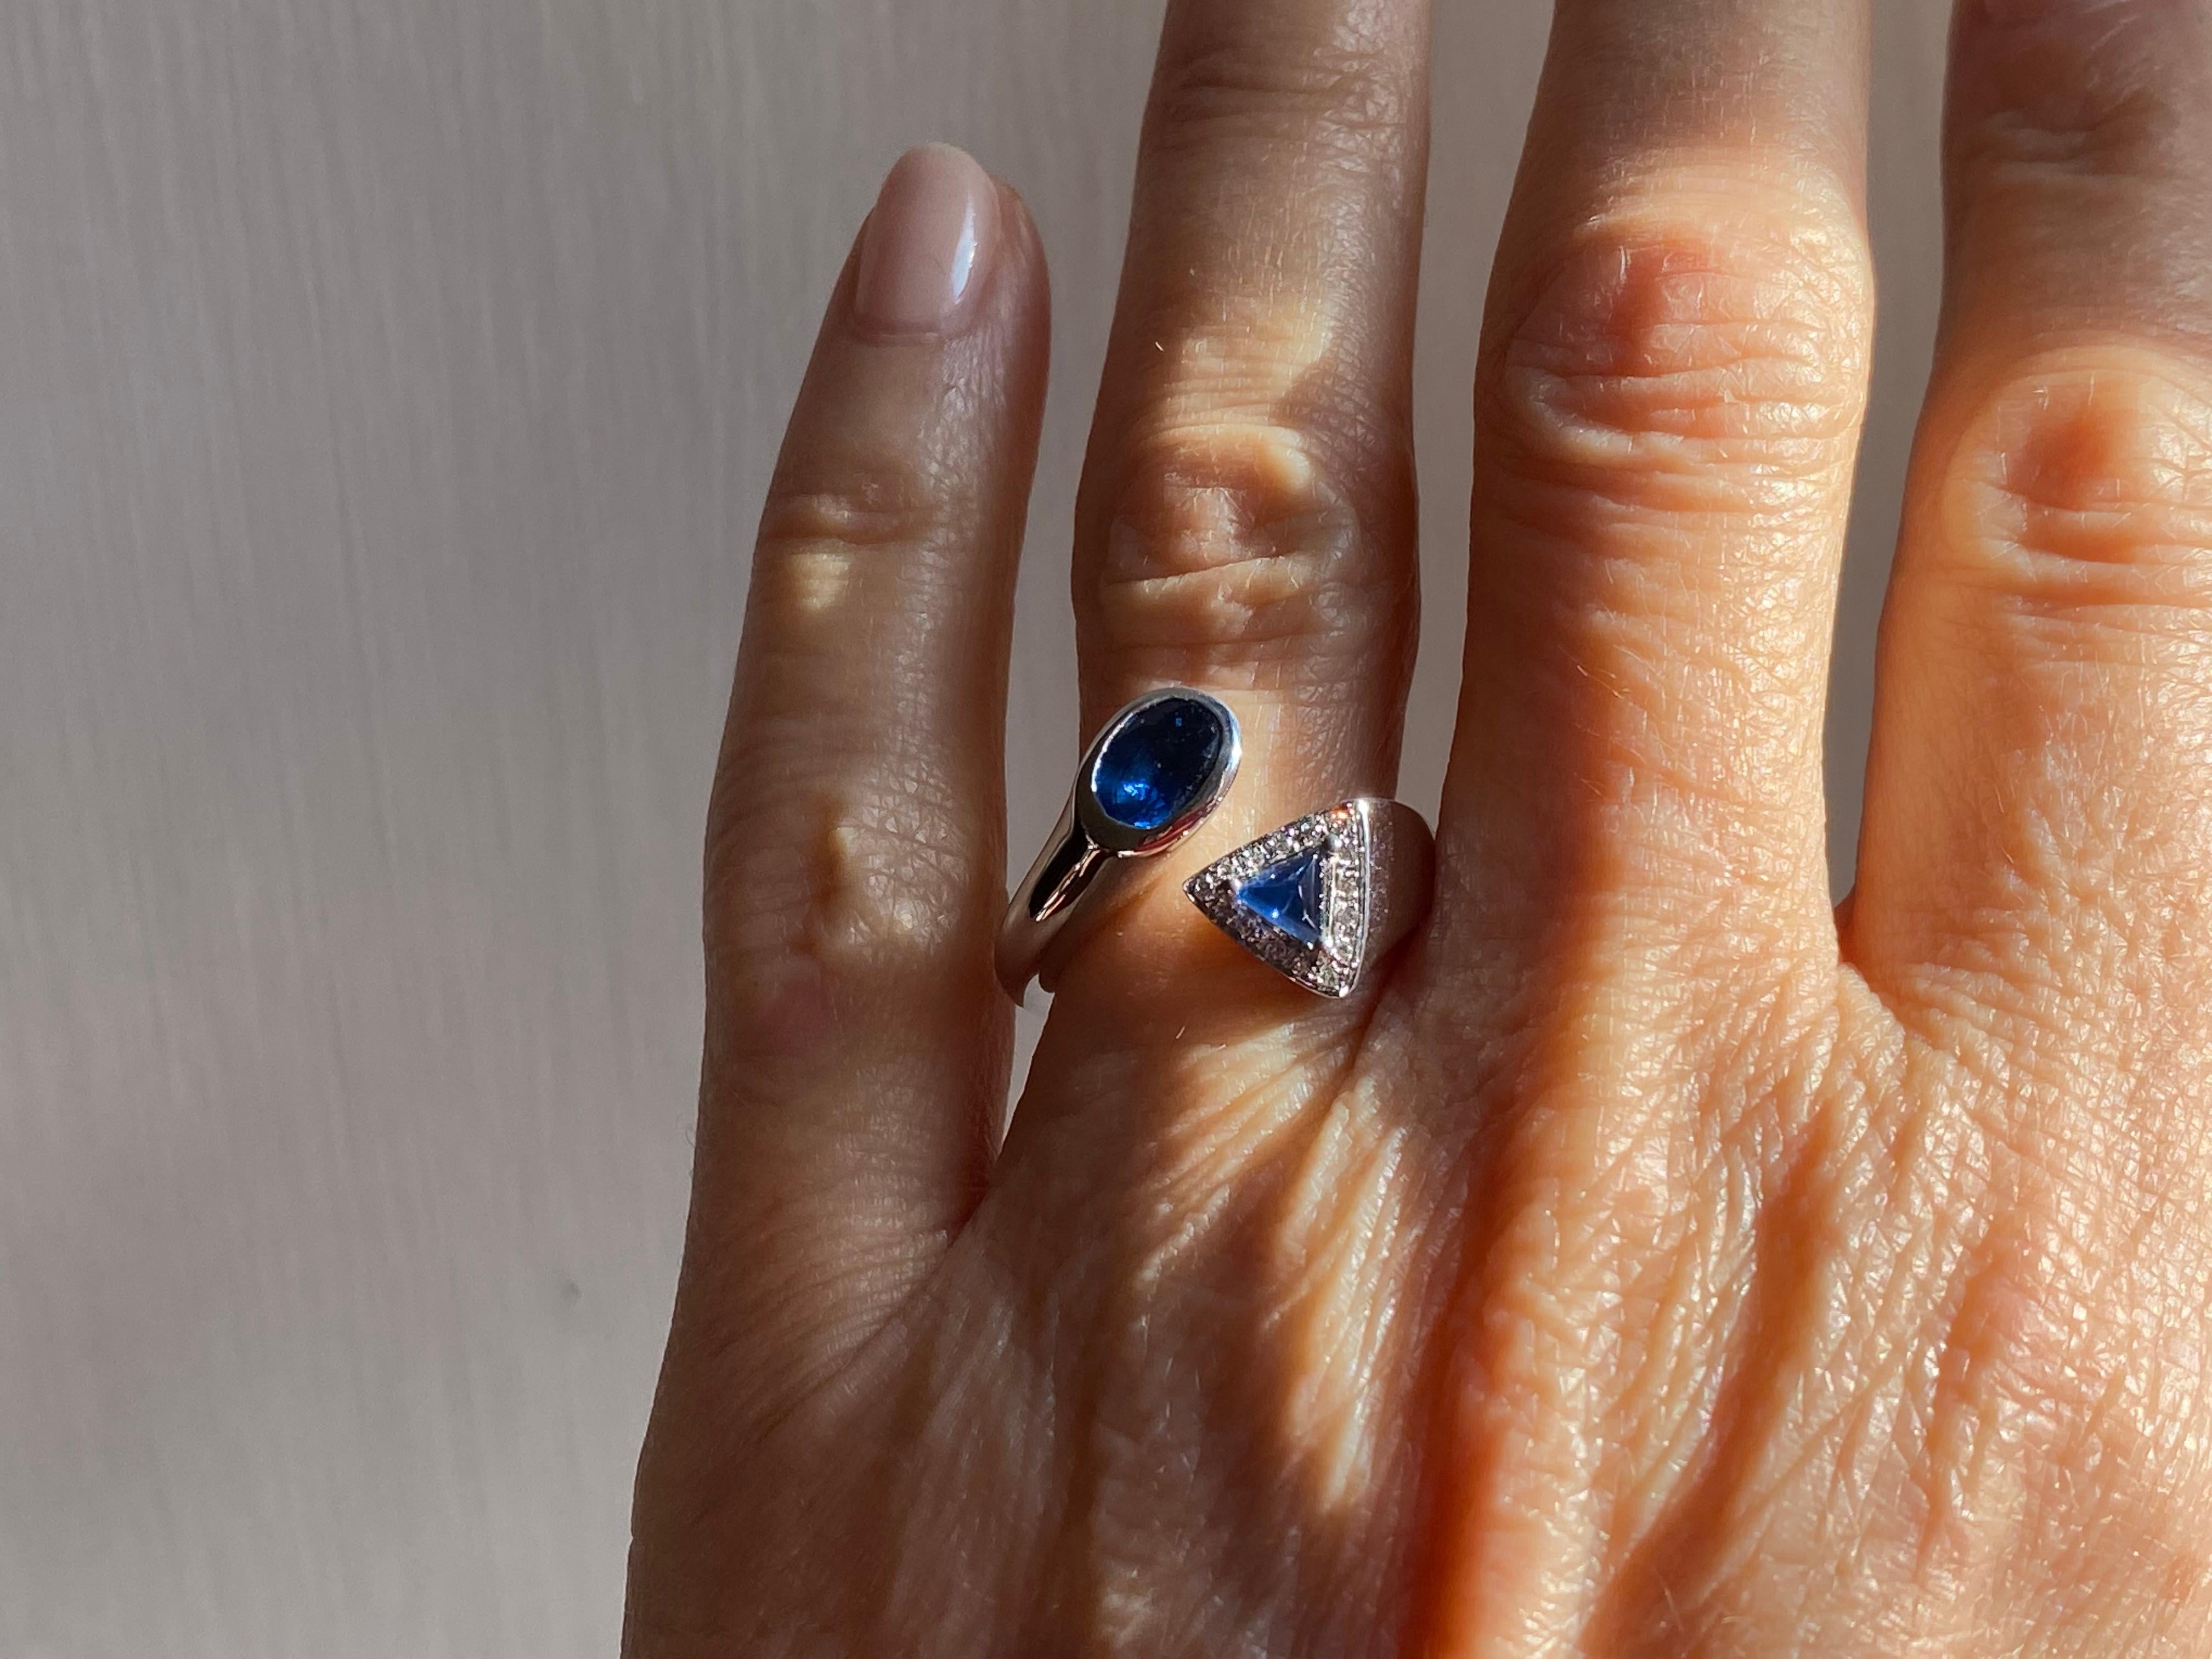 Rossella Ugolini Design Collection Unisex and ready to ship a 18 Karats White Gold 1.20 Karats Sapphire 0.075 White Diamonds Toi et Moi Contraire Design Ring.
The Toi et Moi style is a Timeless ring made with two separate stones the look at each